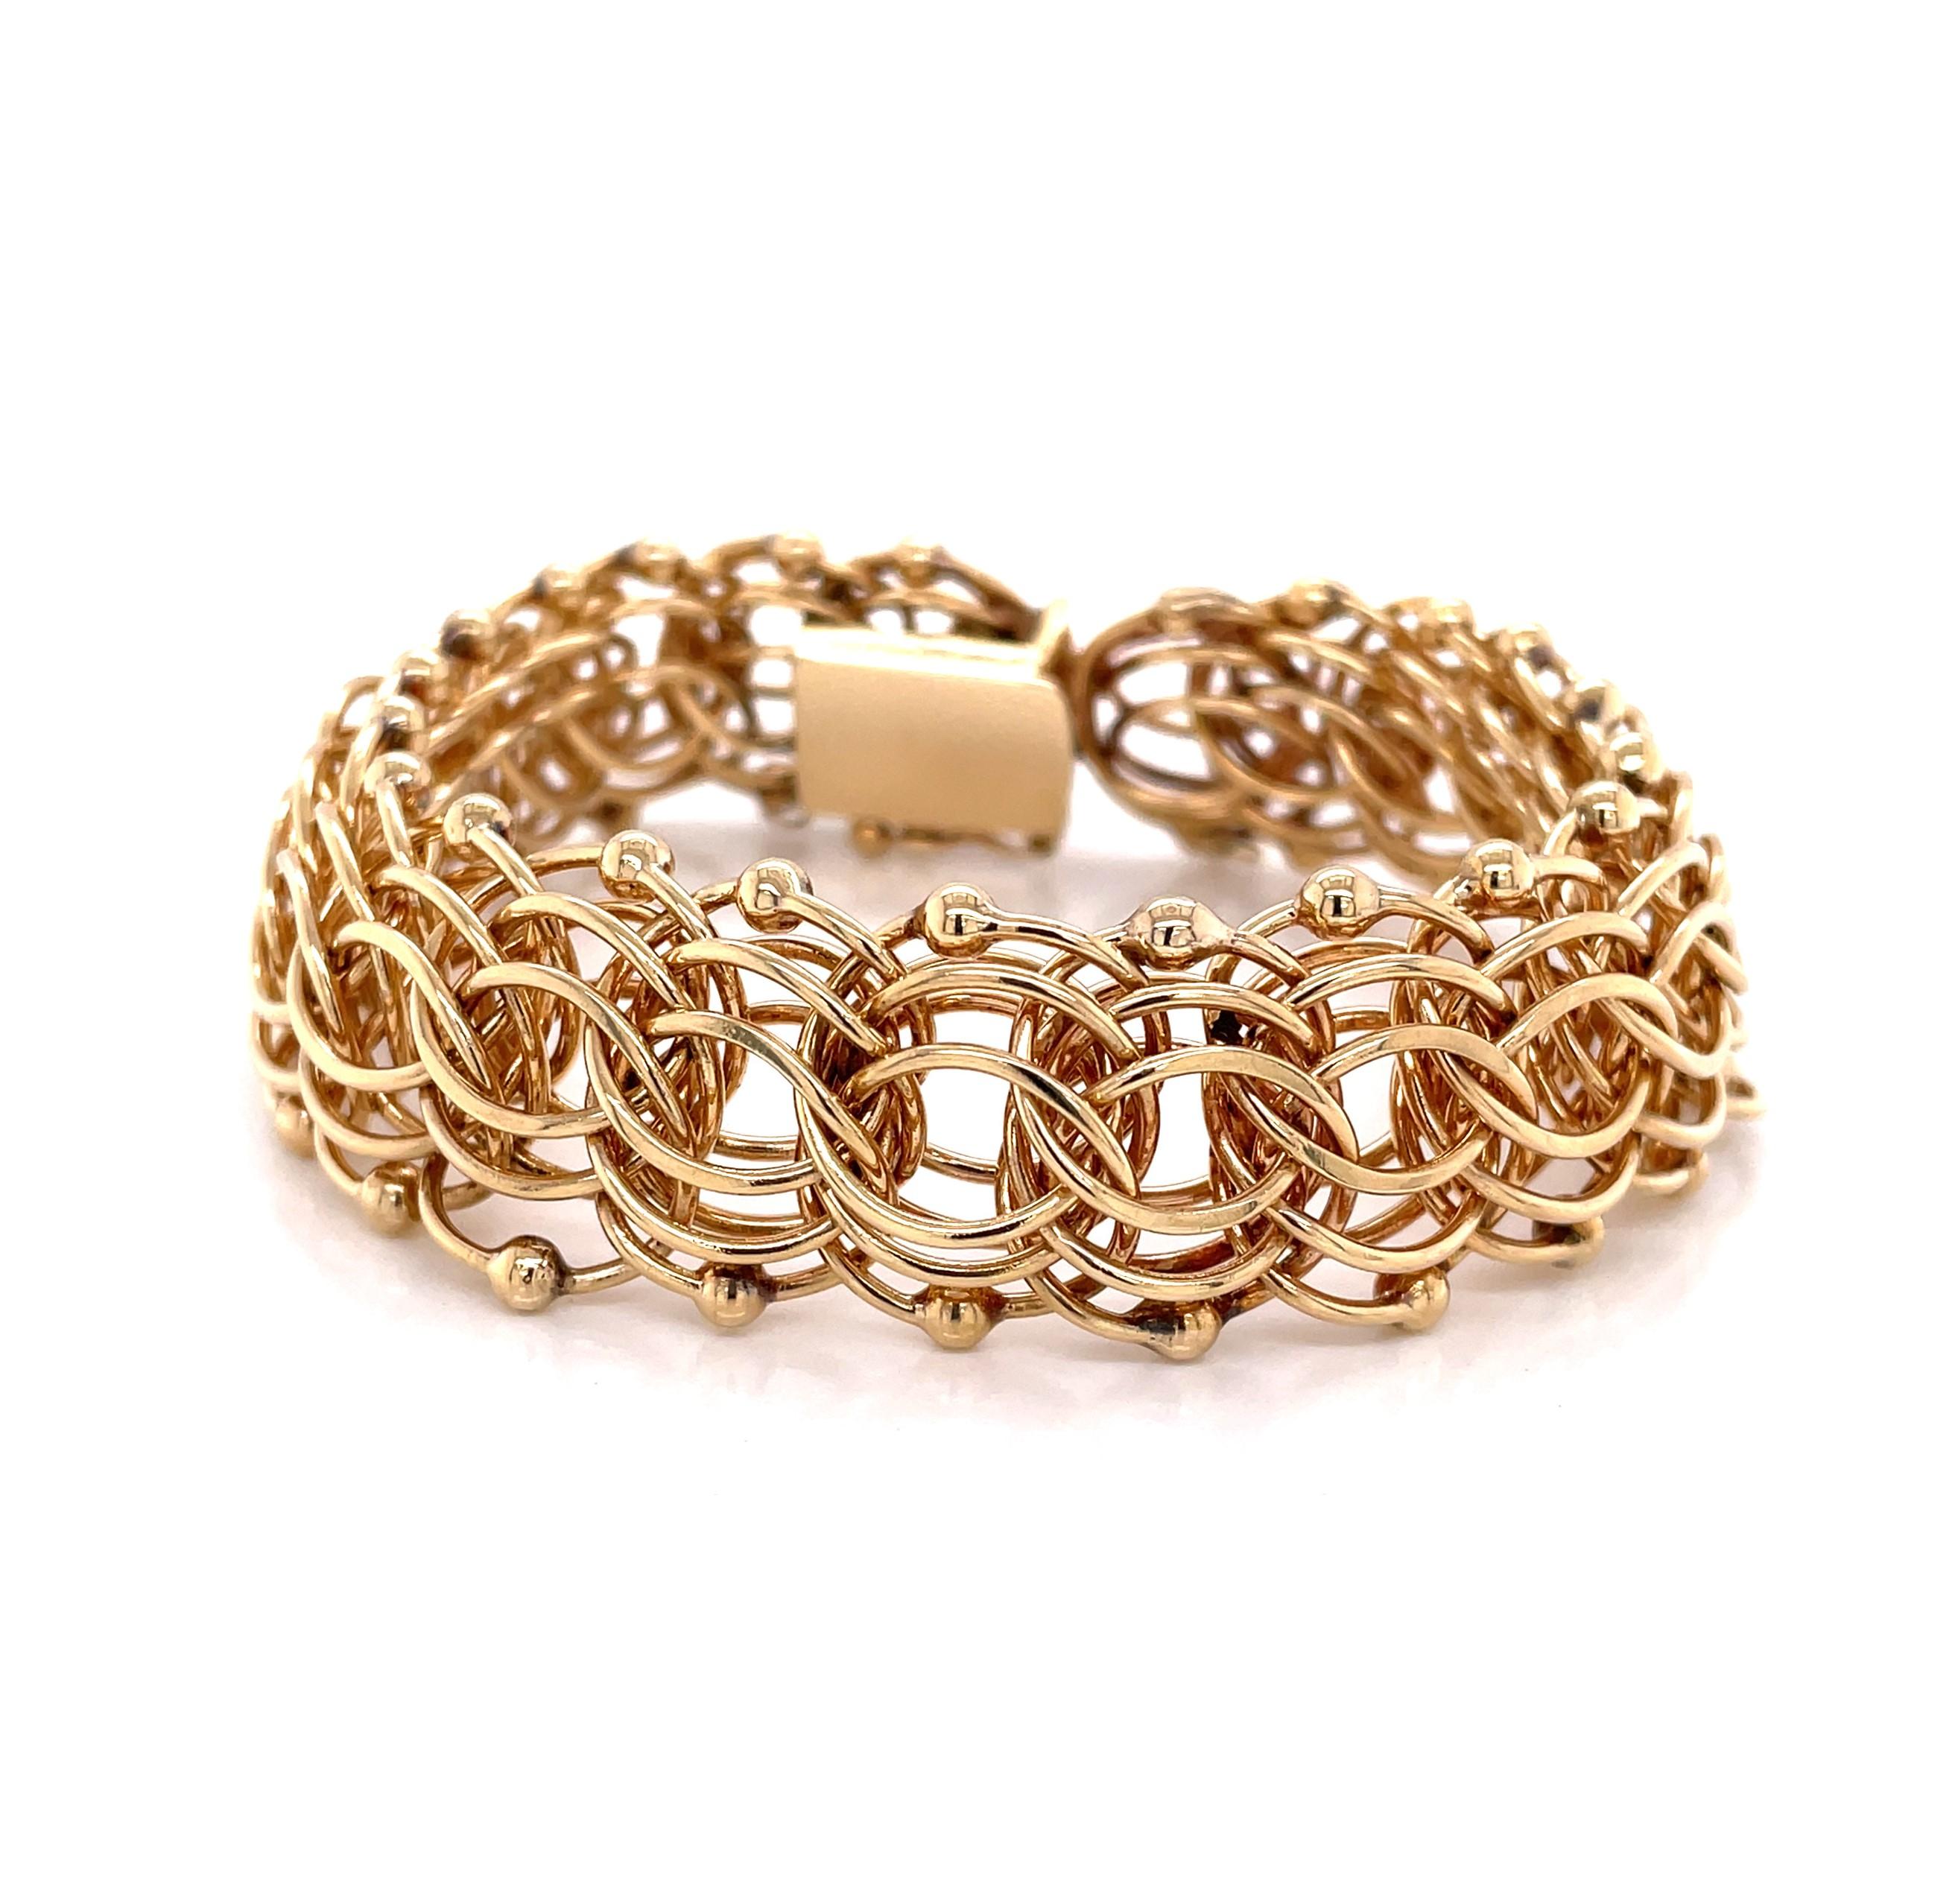 A sensational timeless classic. Bold, in 14 Karat yellow gold this substantial circa 1950's charm link bracelet makes a statement with twenty two interwoven gold 3/4 inch tri-links accented with a
gold bead edge detail. The bracelet's length is 8